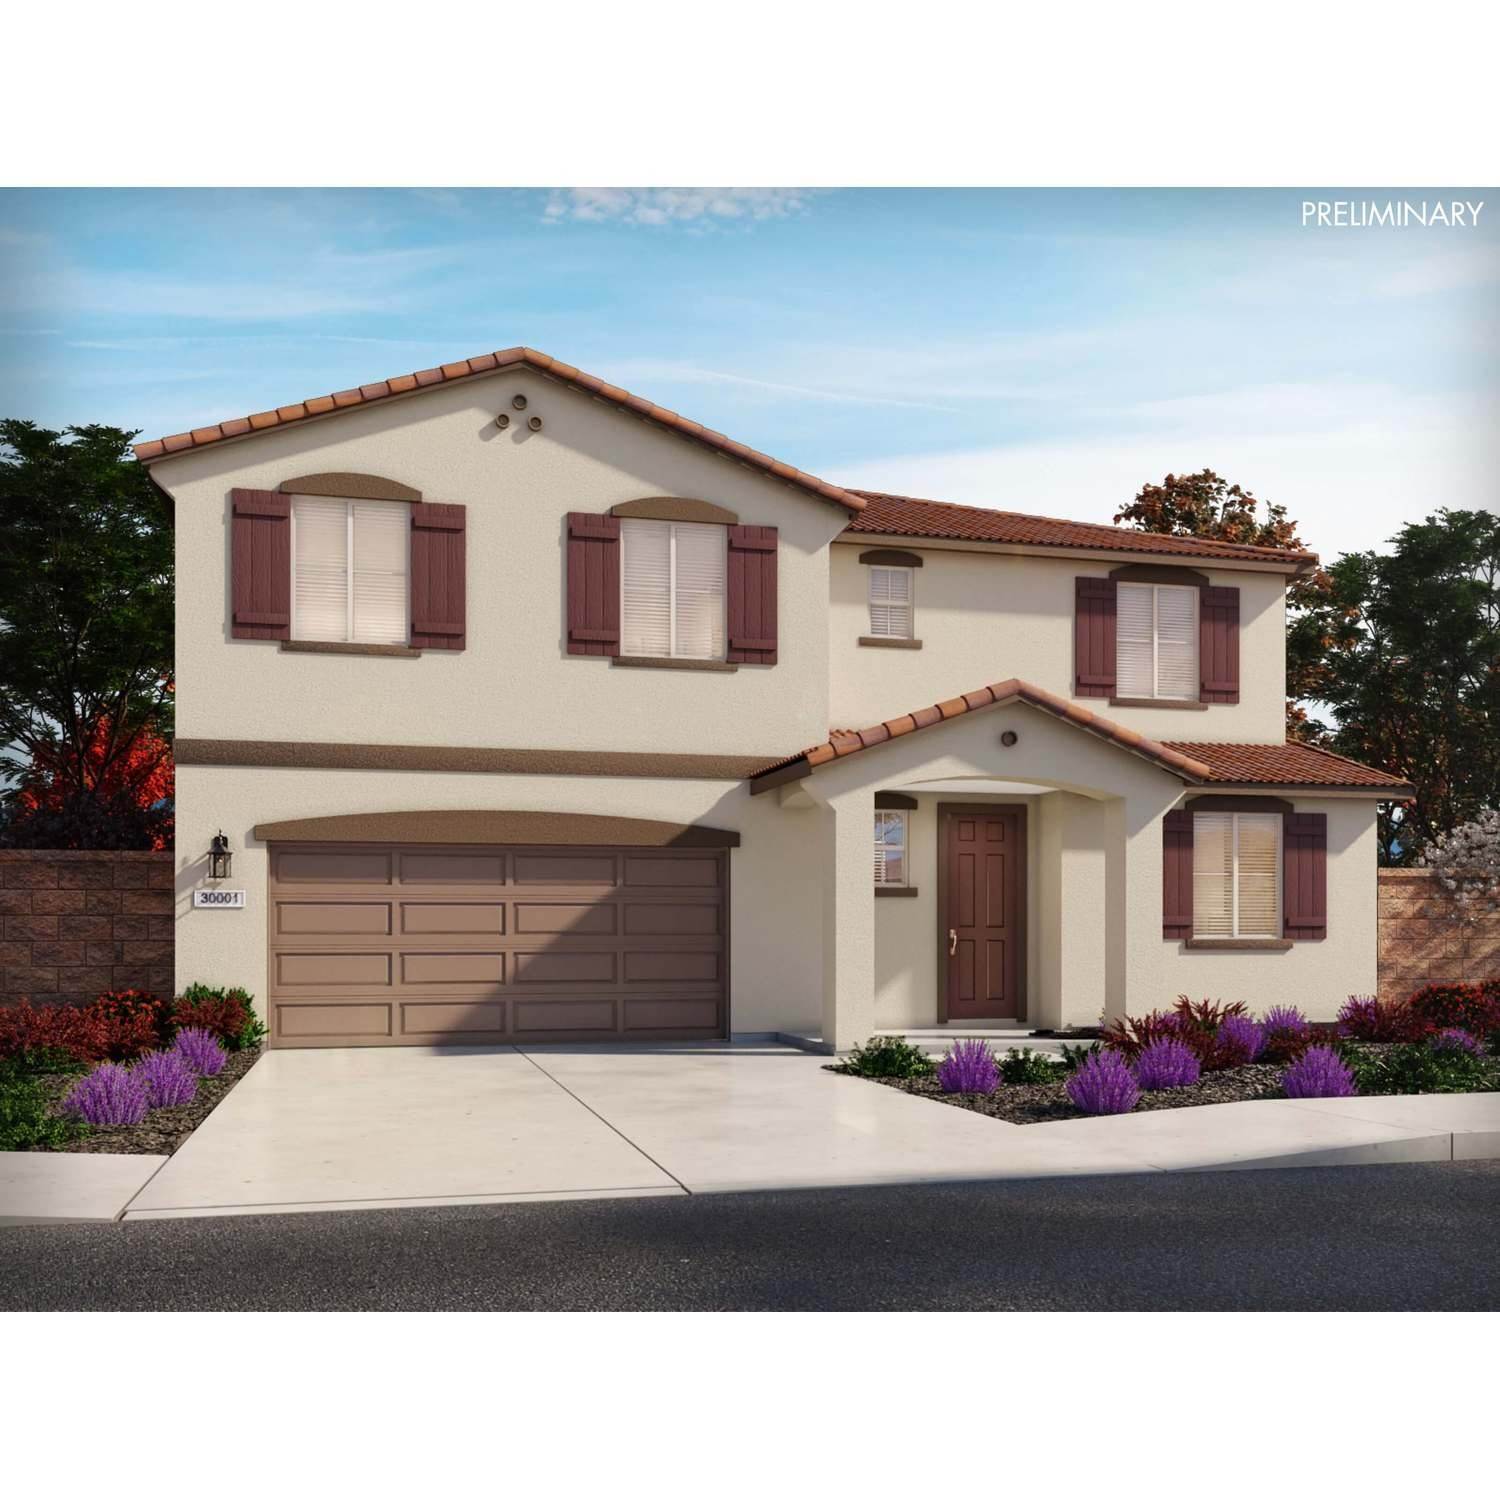 Single Family for Sale at Beaumont, CA 92223